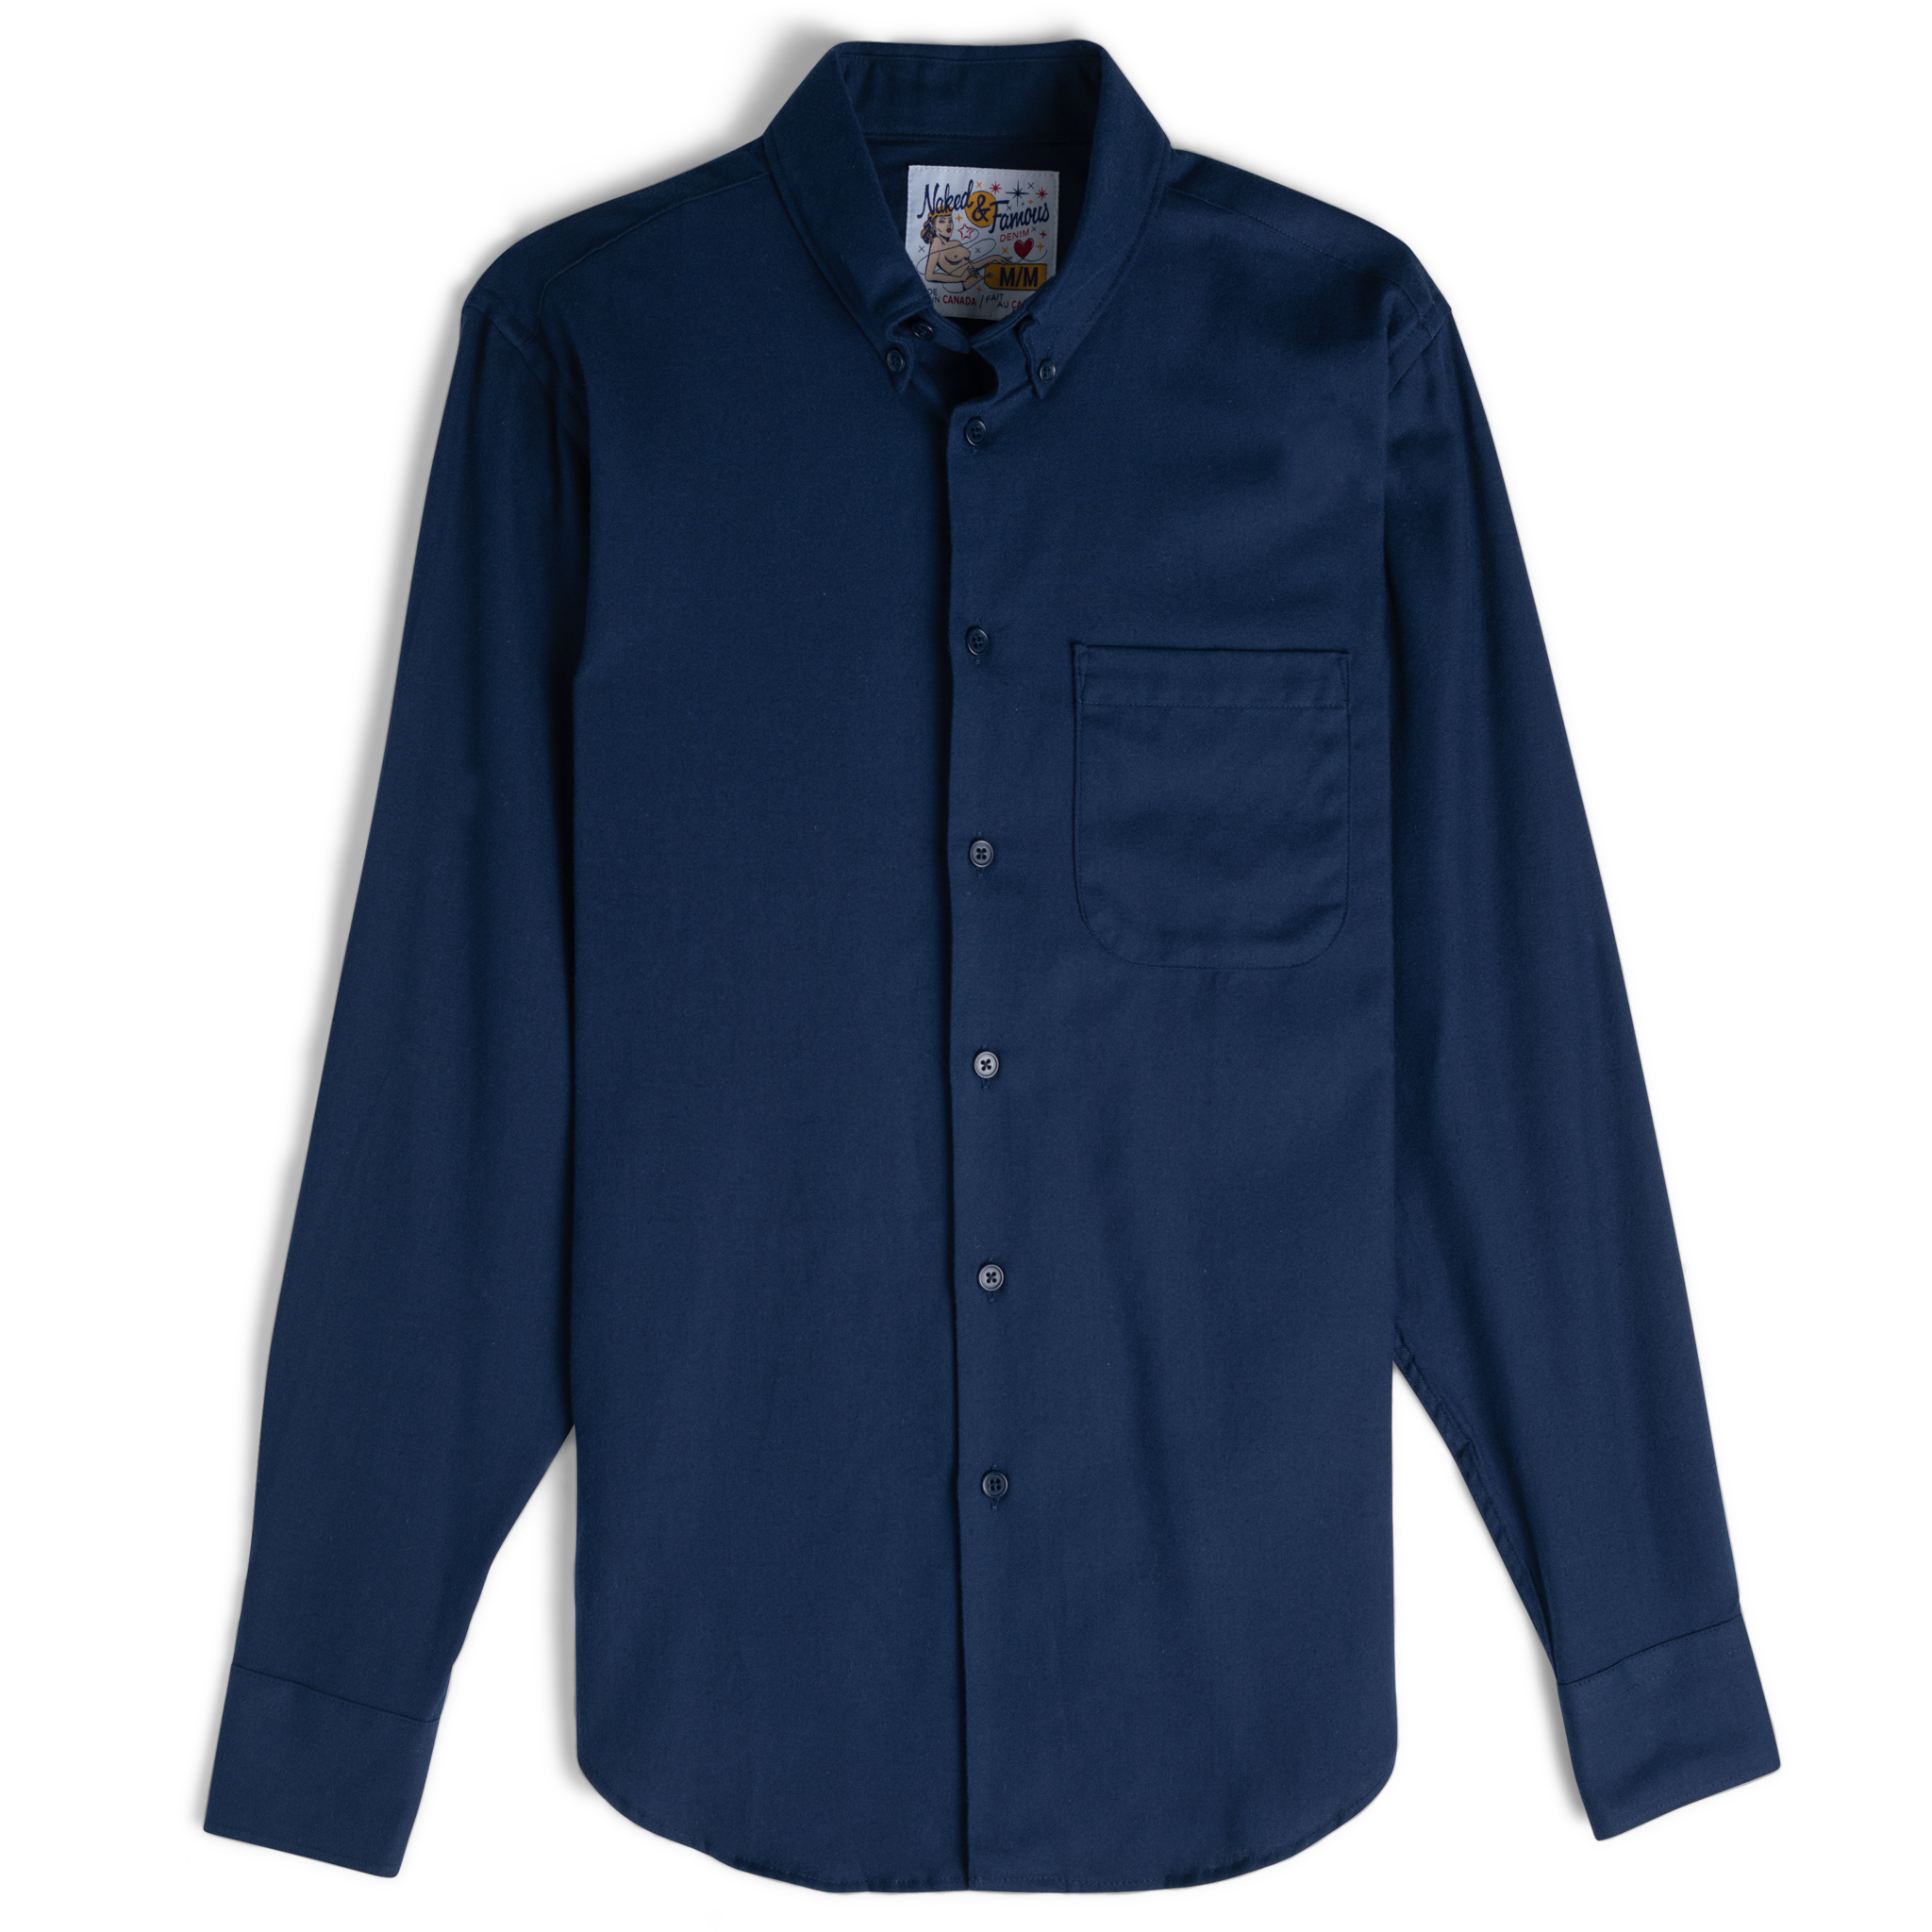  Easy Shirt - Soft Twill - Navy - flat front 